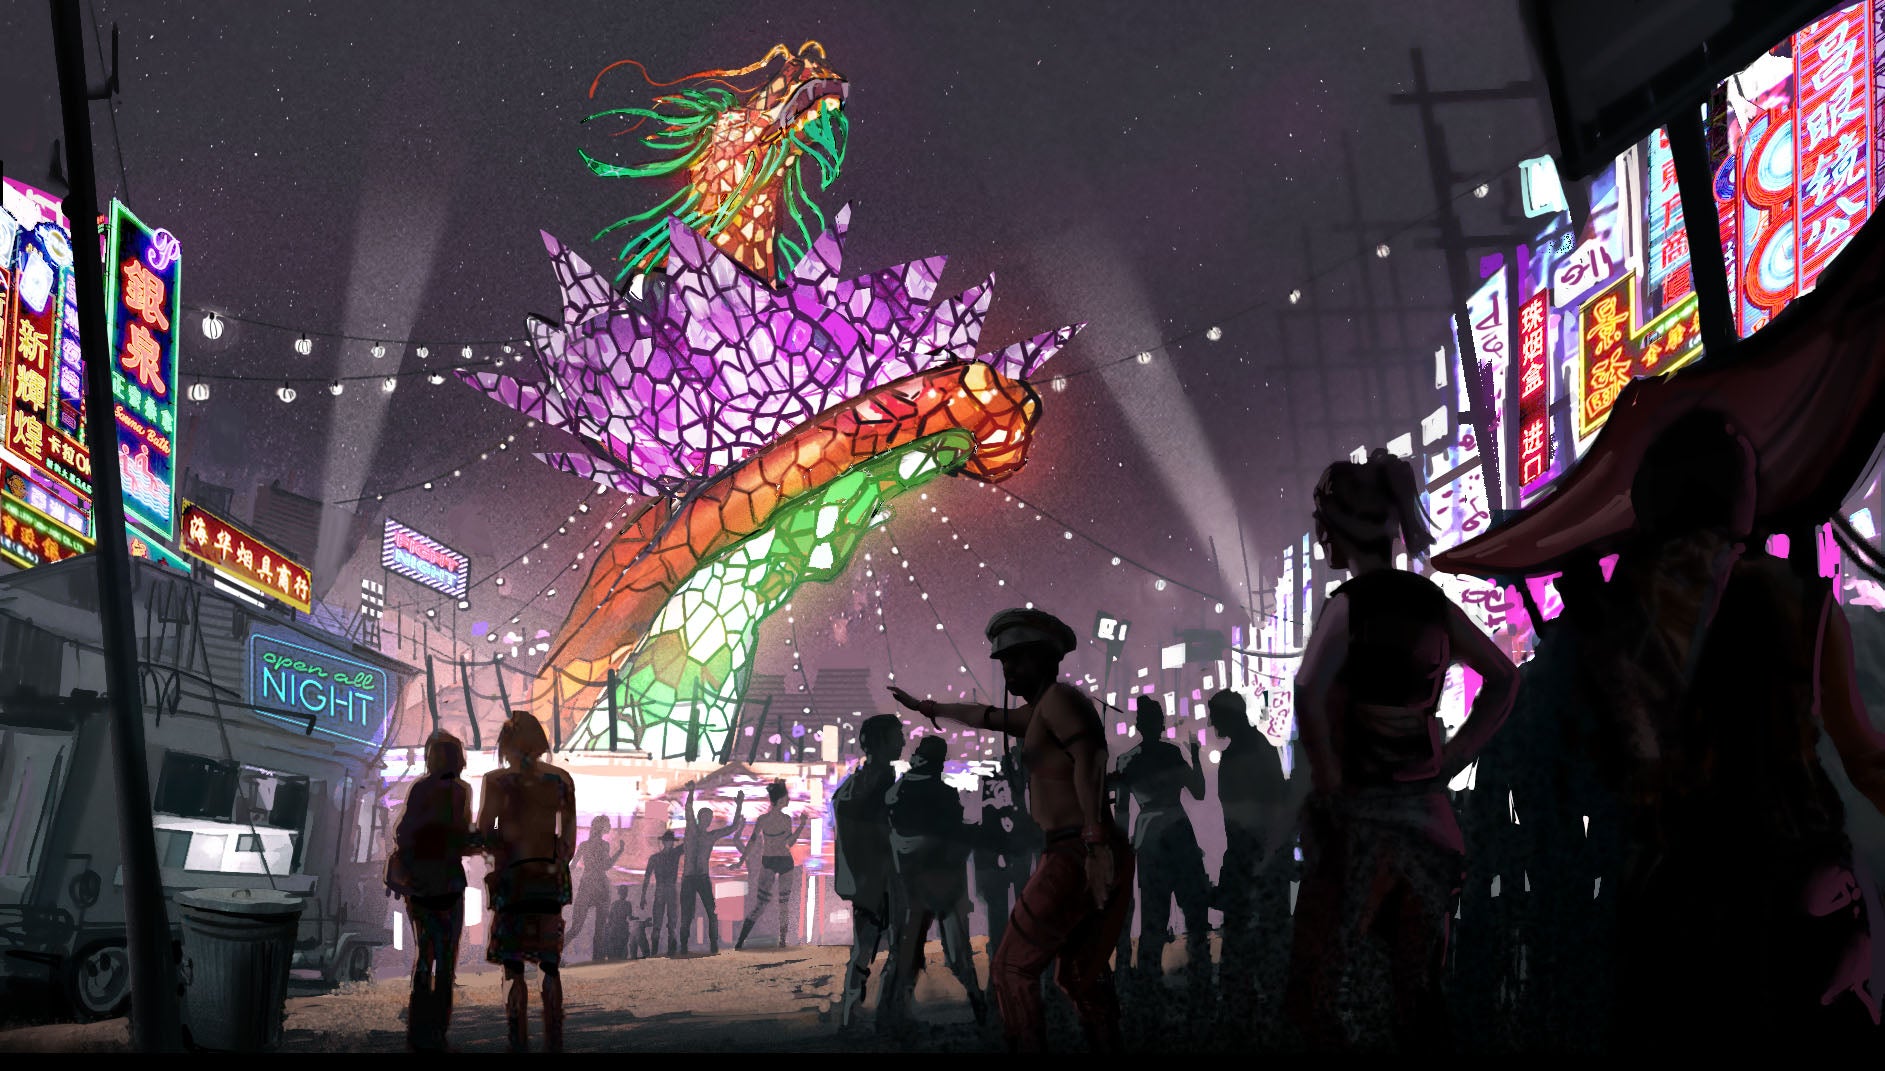 Feng Shui 2: Burning Dragon - Thousands have come to the festival, but only you can save the world! - Bards & Cards